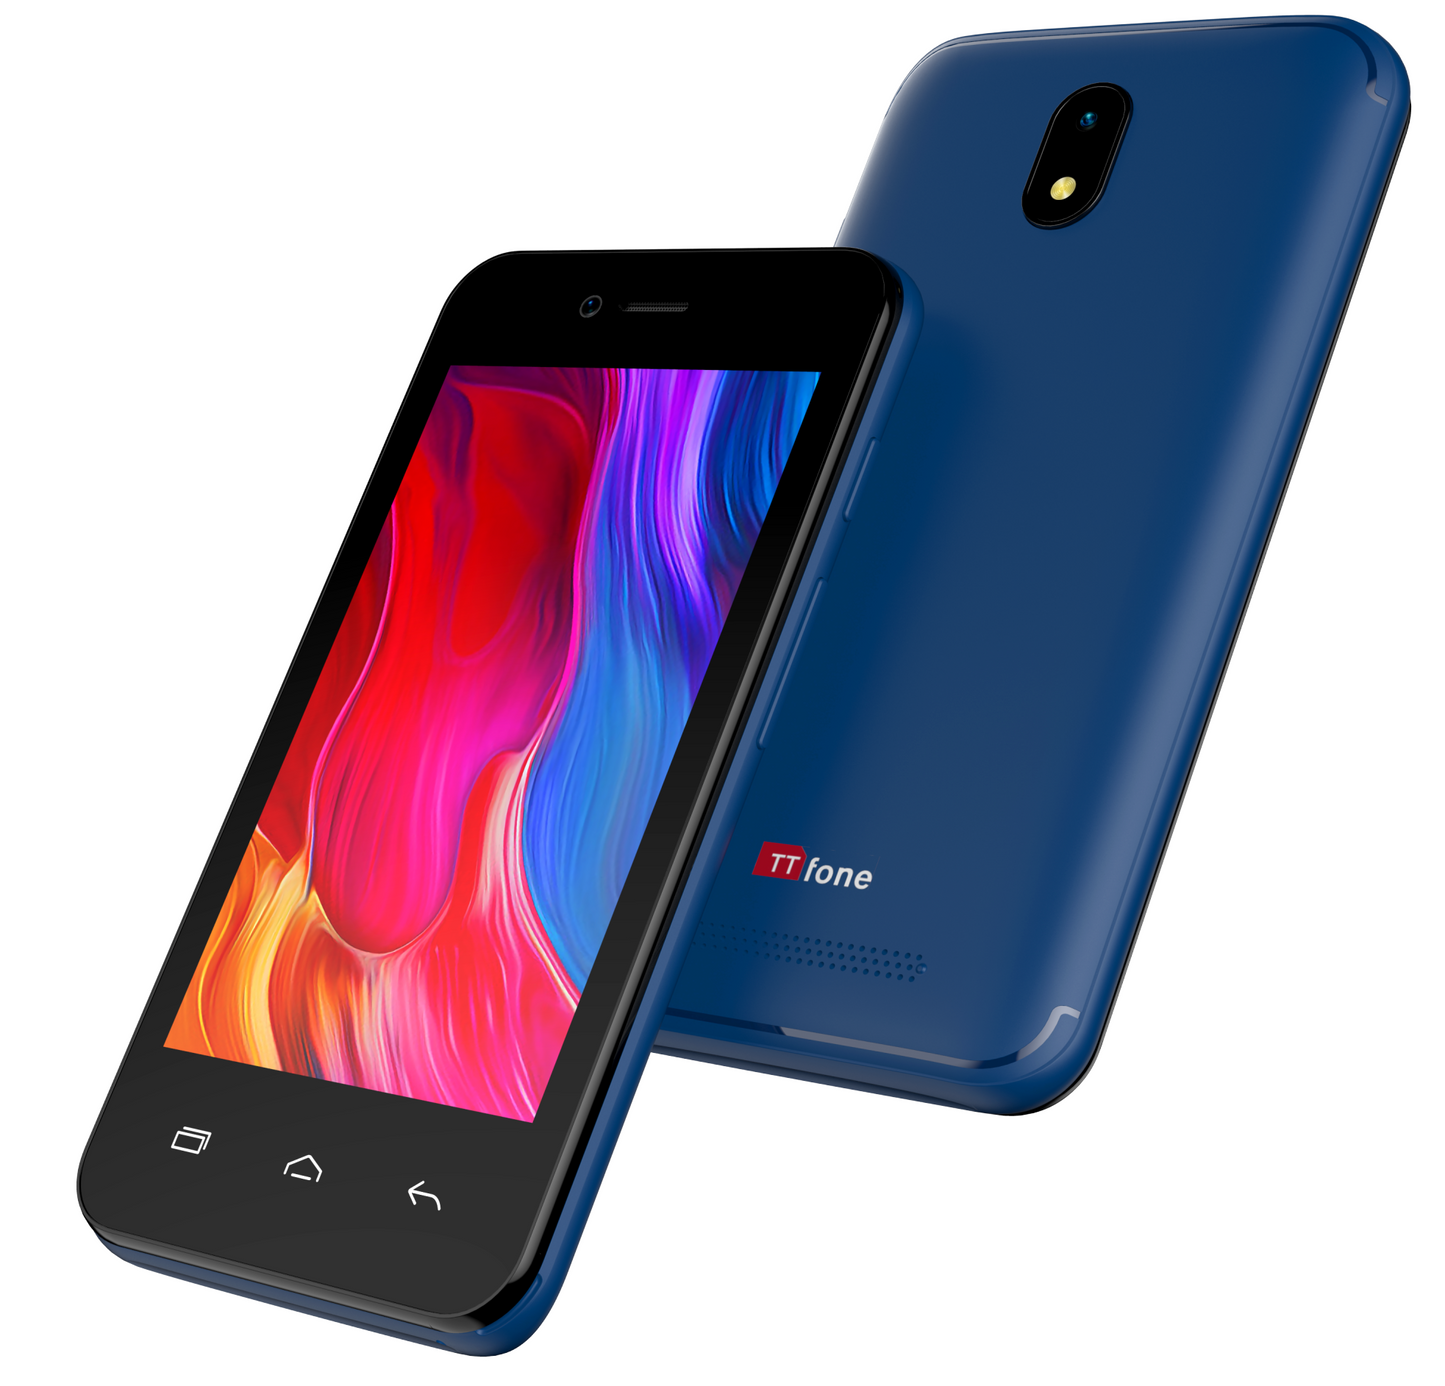 TTfone Blue TT20 Dual SIM - Warehouse Deals with USB Cable and Three Pay As You Go Sim Card